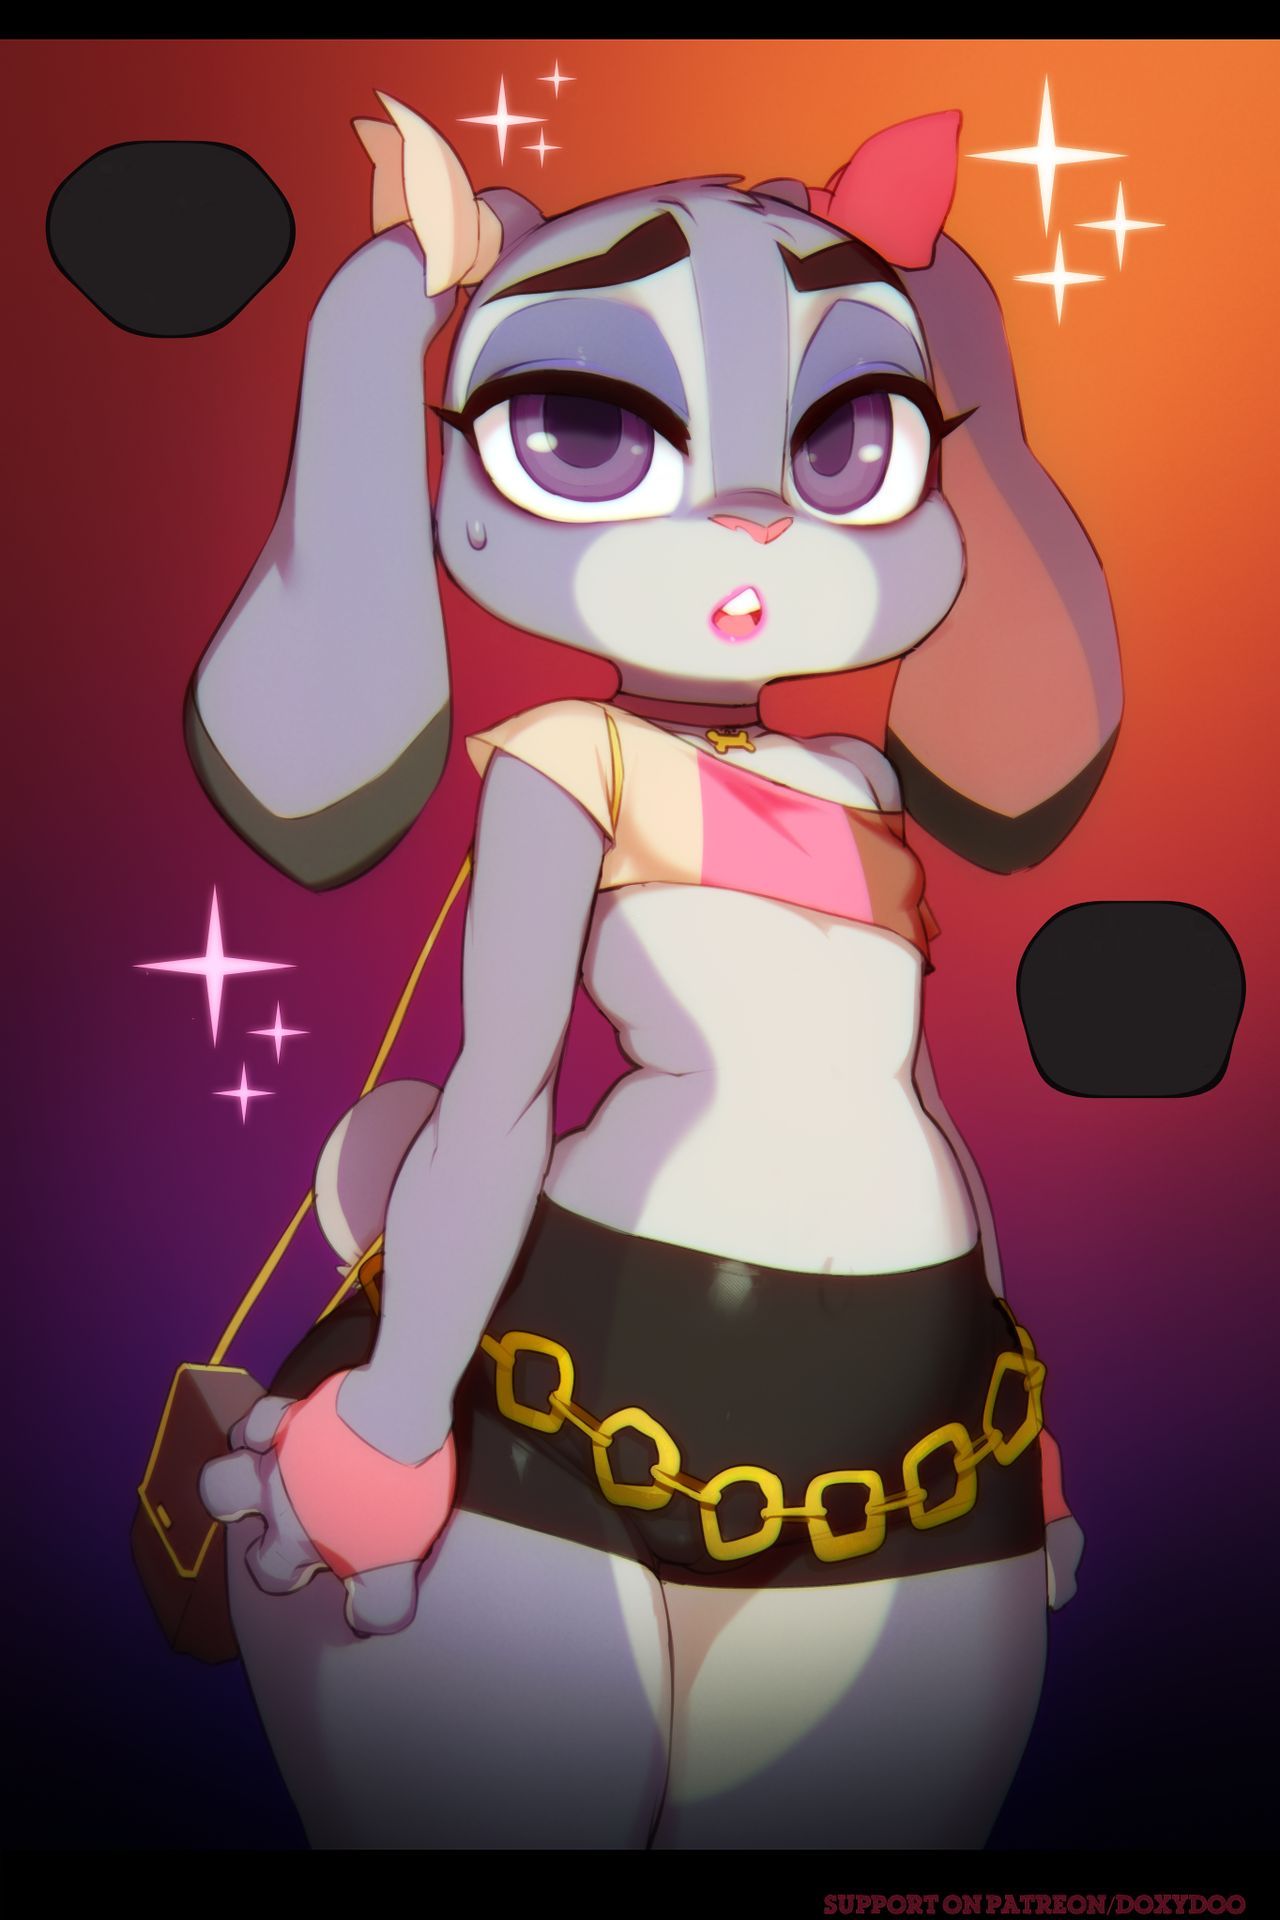 [Doxy] Sweet Sting Part 2: Down The Rabbit Hole (Zootopia) [Textless] [Ongoing] 7